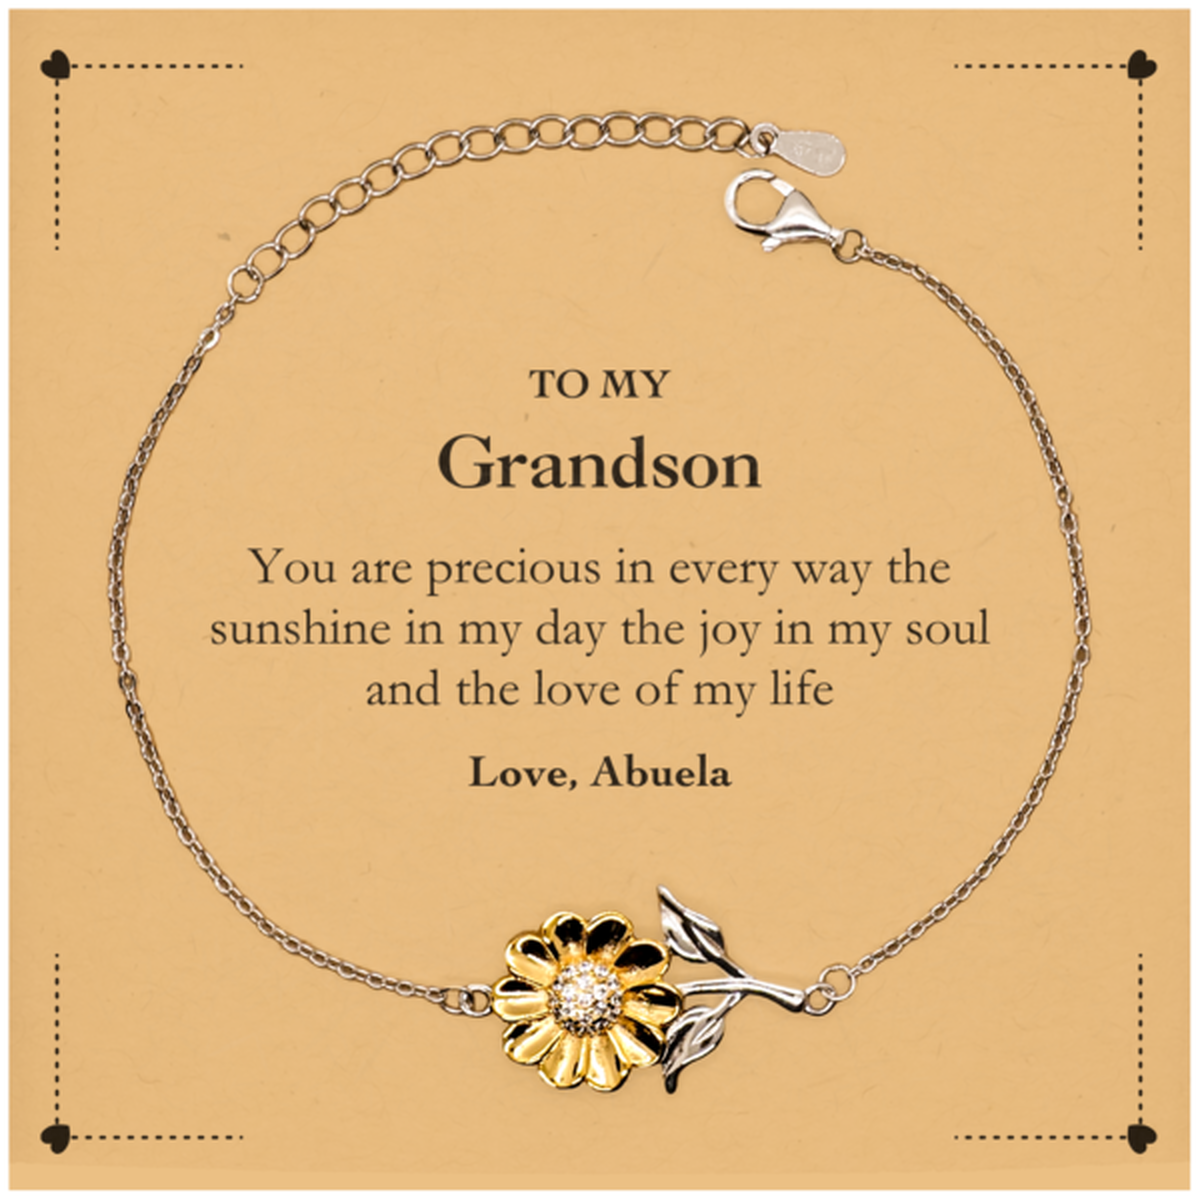 Graduation Gifts for Grandson Sunflower Bracelet Present from Abuela, Christmas Grandson Birthday Gifts Grandson You are precious in every way the sunshine in my day. Love, Abuela